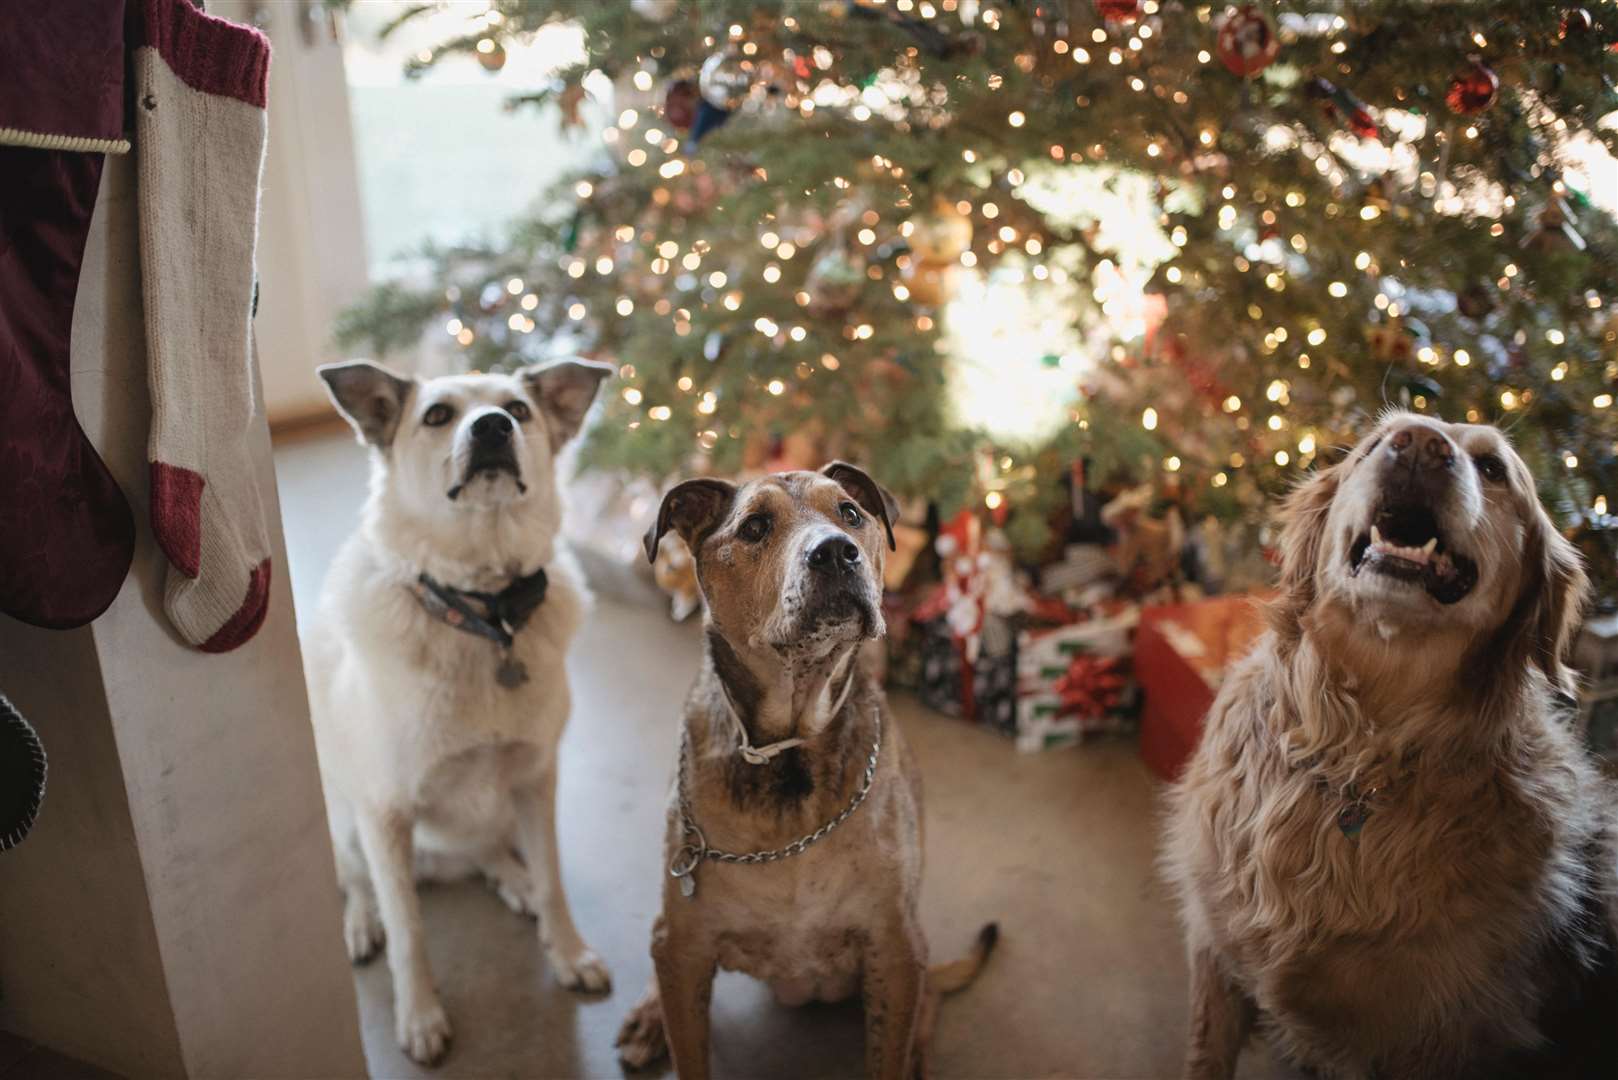 Dogs could hurt themselves by chewing on fairy lights. Picture: Jasmin Schuler, Unsplash